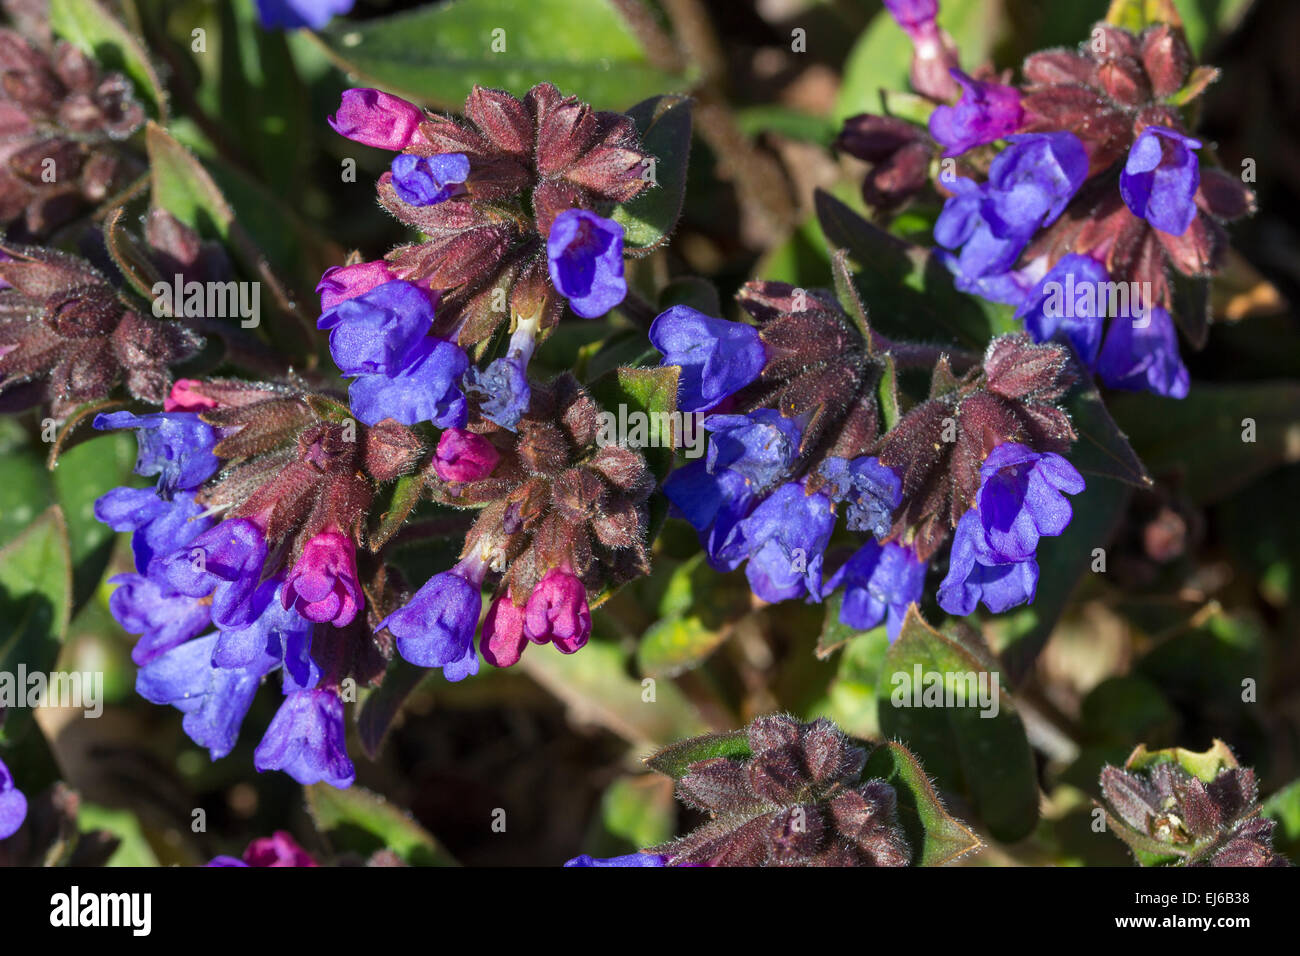 Early spring red buds open to blue flowers in Pulmonaria 'Benediction'.  Spotted leaves follow. Stock Photo